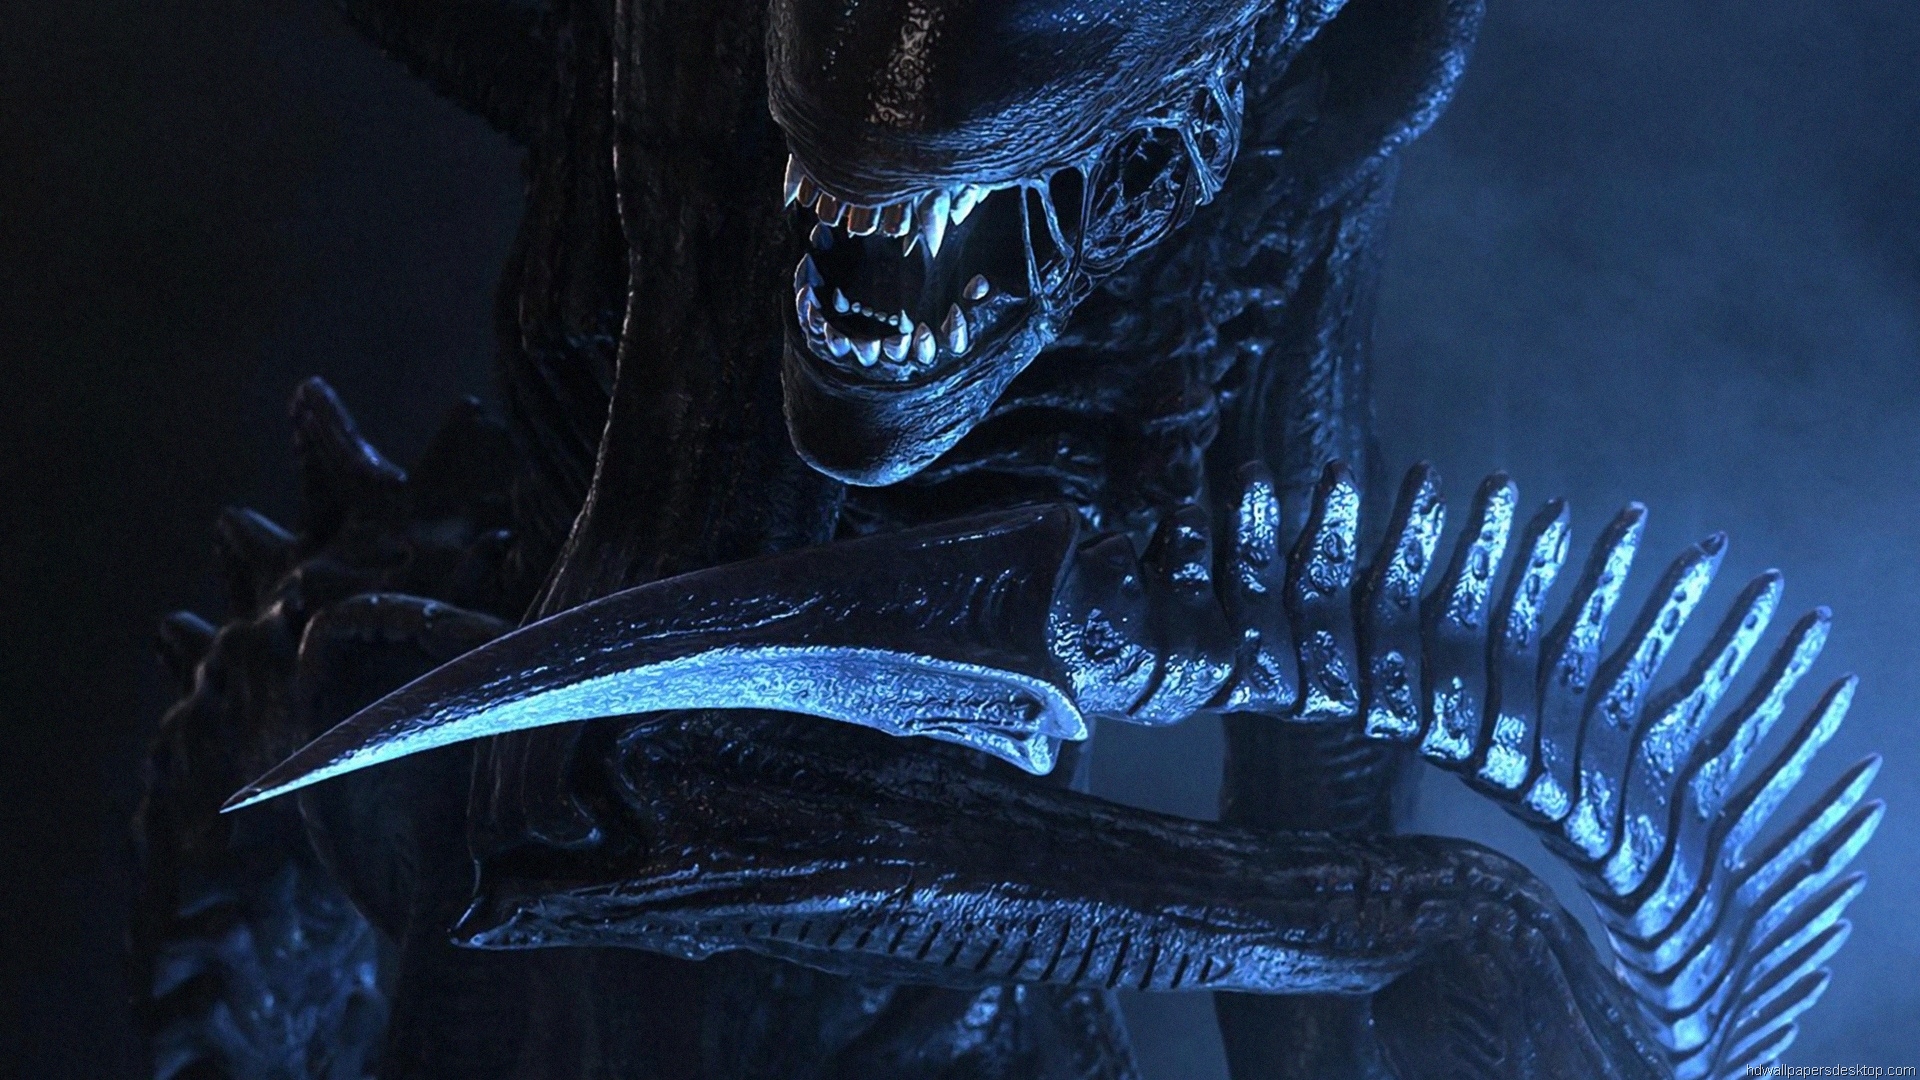 Movie HD Wallpapers Full HD 1080p Movies Wallpapers 198 aliens